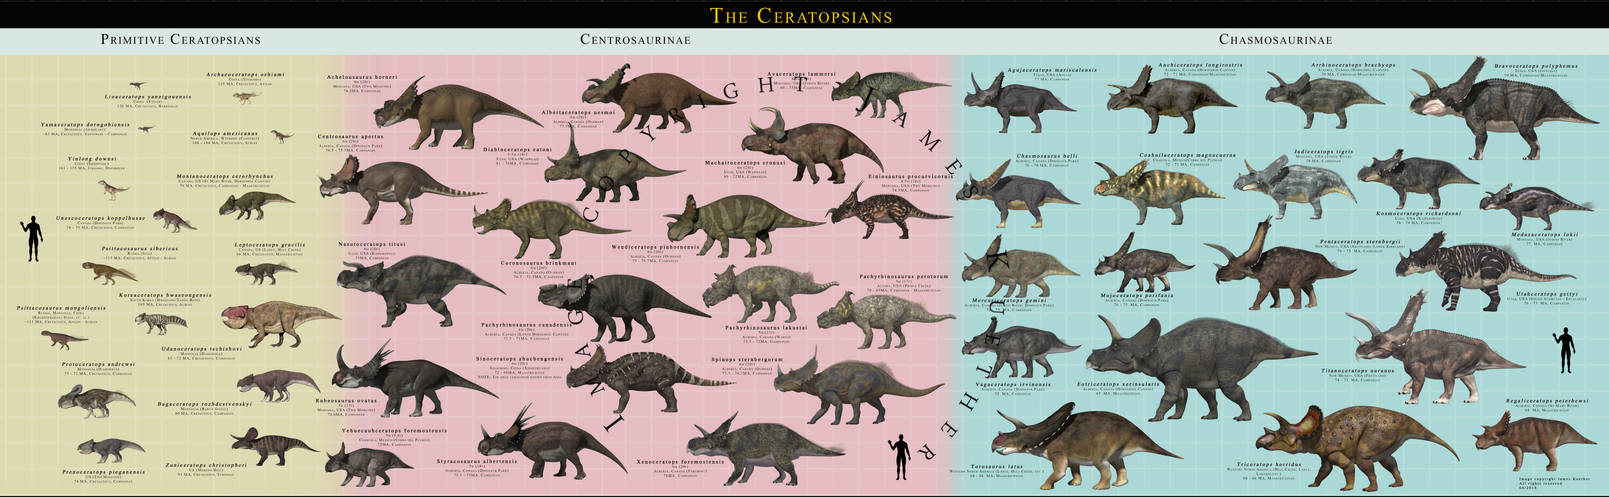 The Ceratopsians Complete